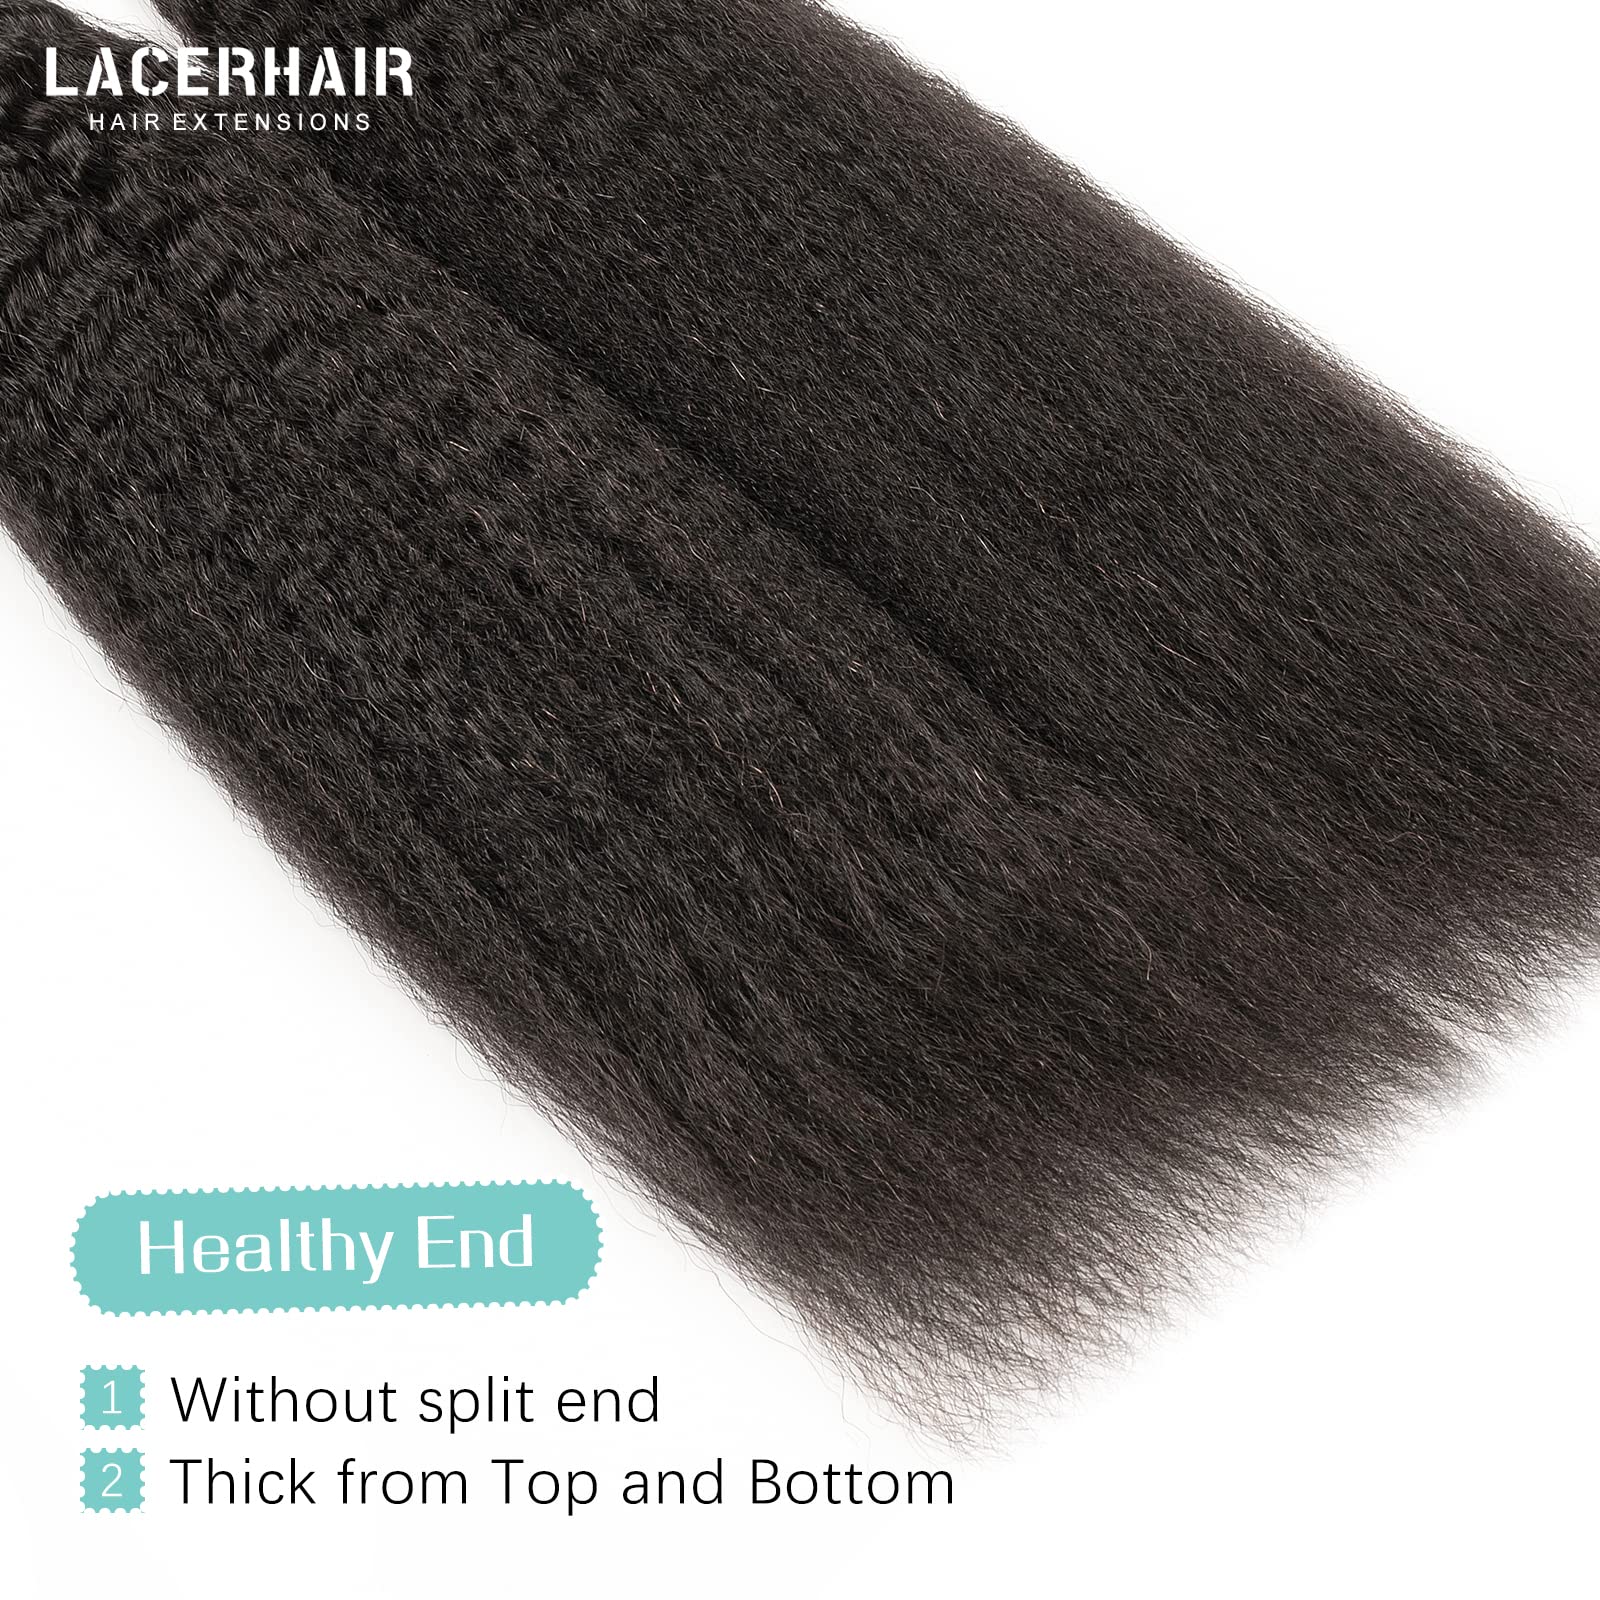 kinky straight Tape in Hair Extensions for Black